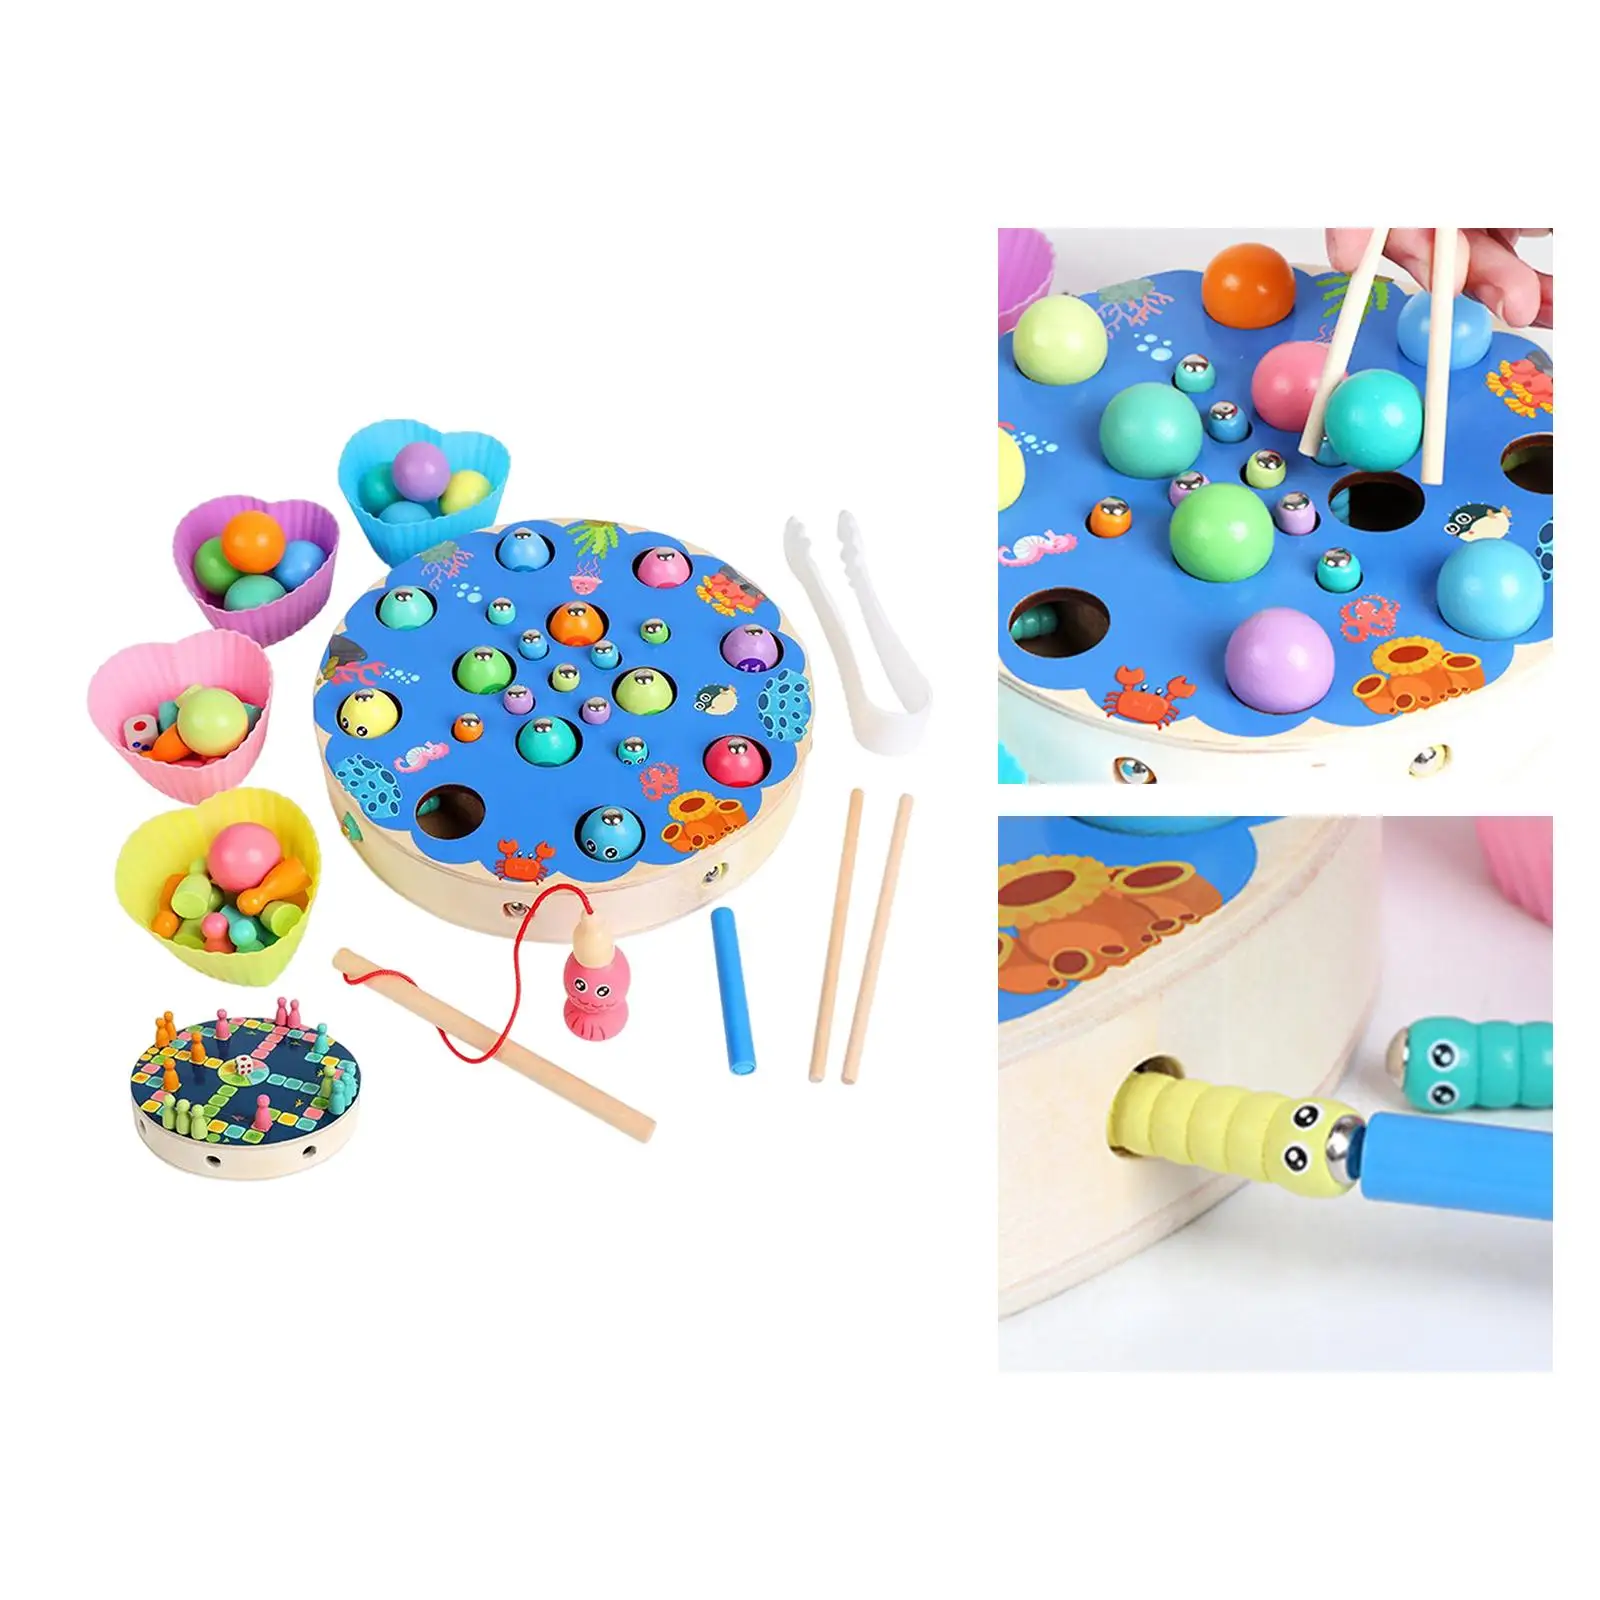 Multicolor Wooden Fishing Game Fishing Pole Chopsticks Fine Motor Skill Learning Toy for Game Teaching Indoor Birthday Activity